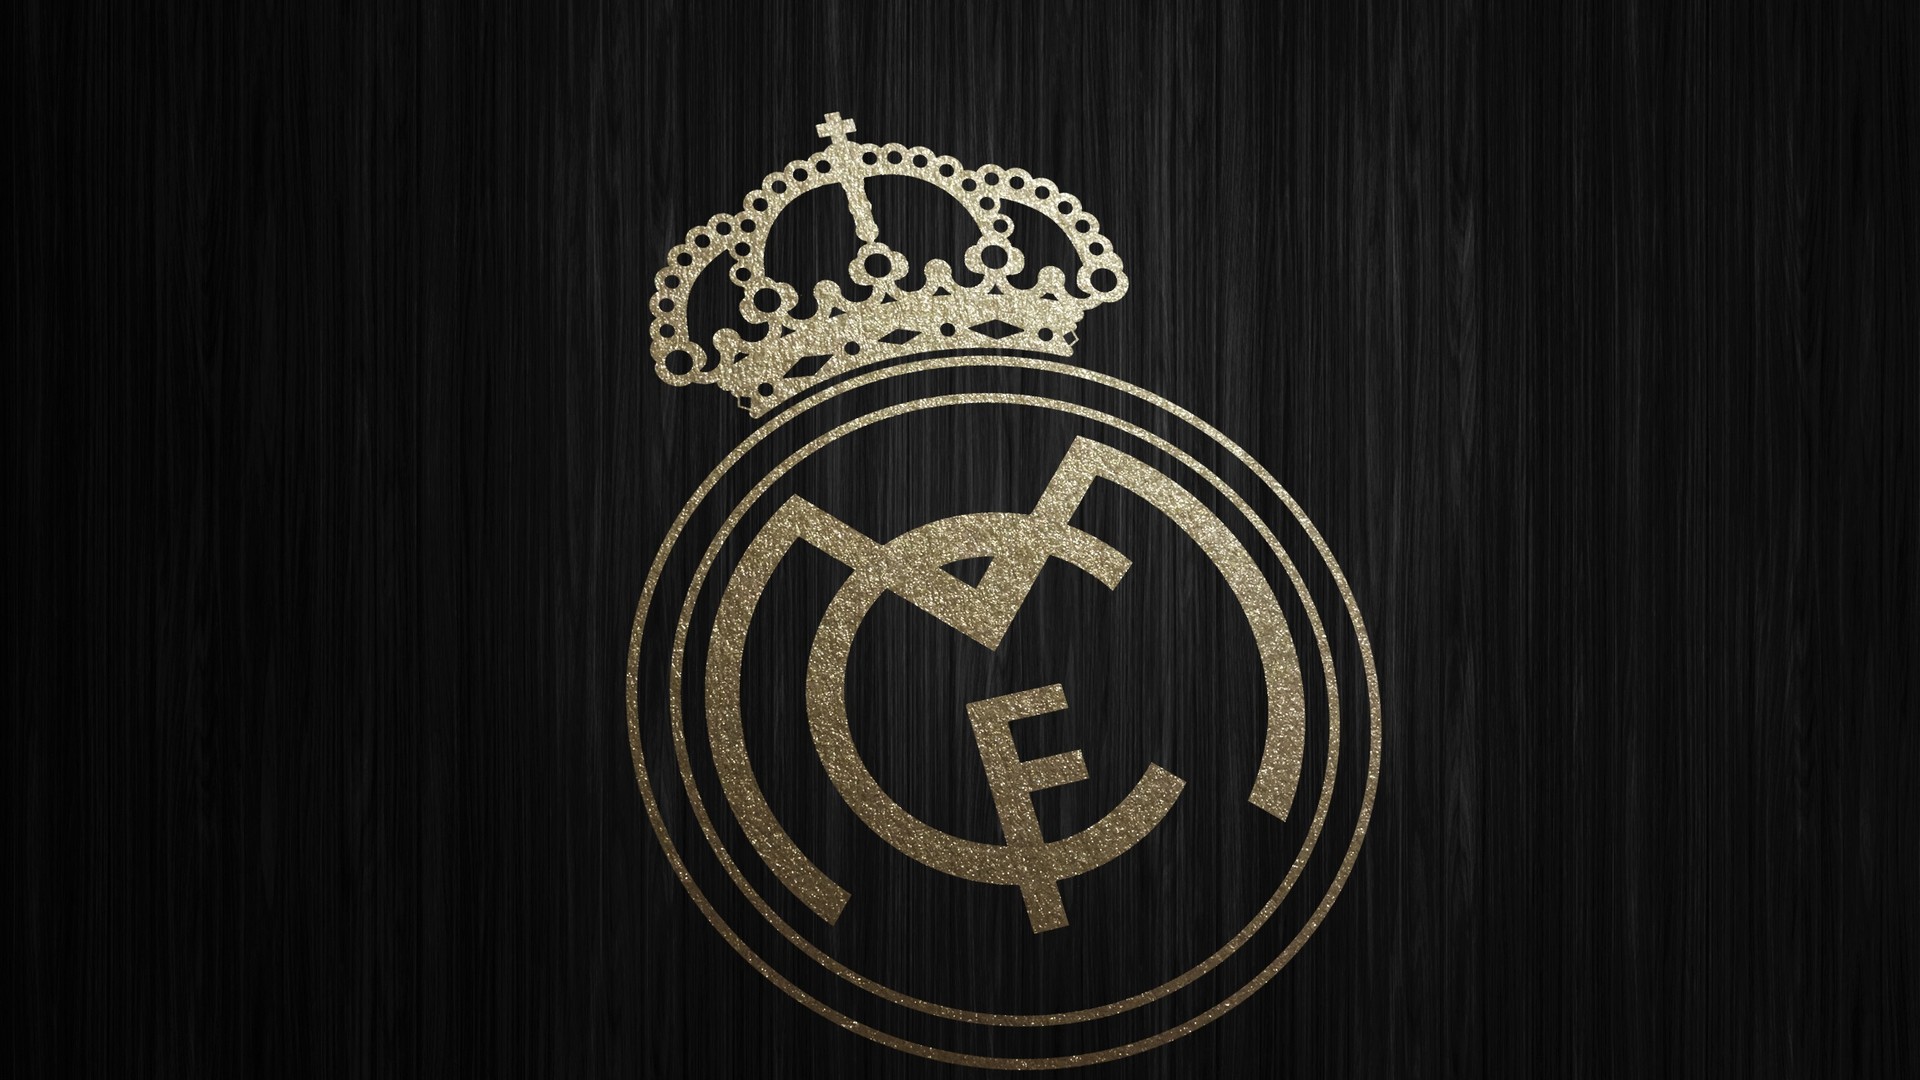 Wallpapers HD Real Madrid with resolution 1920x1080 pixel. You can make this wallpaper for your Mac or Windows Desktop Background, iPhone, Android or Tablet and another Smartphone device